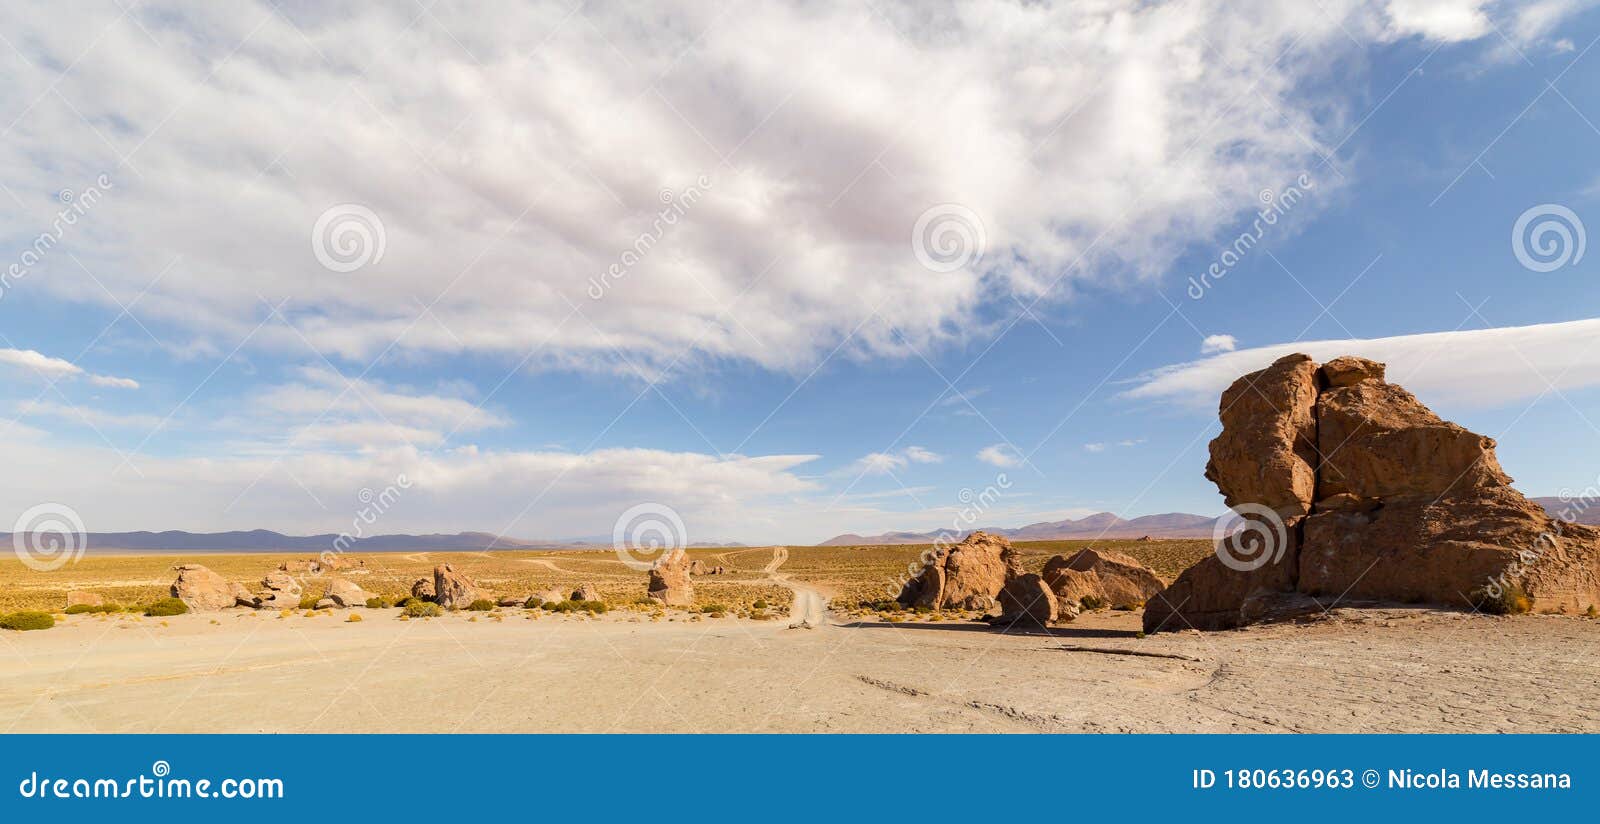 valle de rocas, or stone valley, in southern bolivia